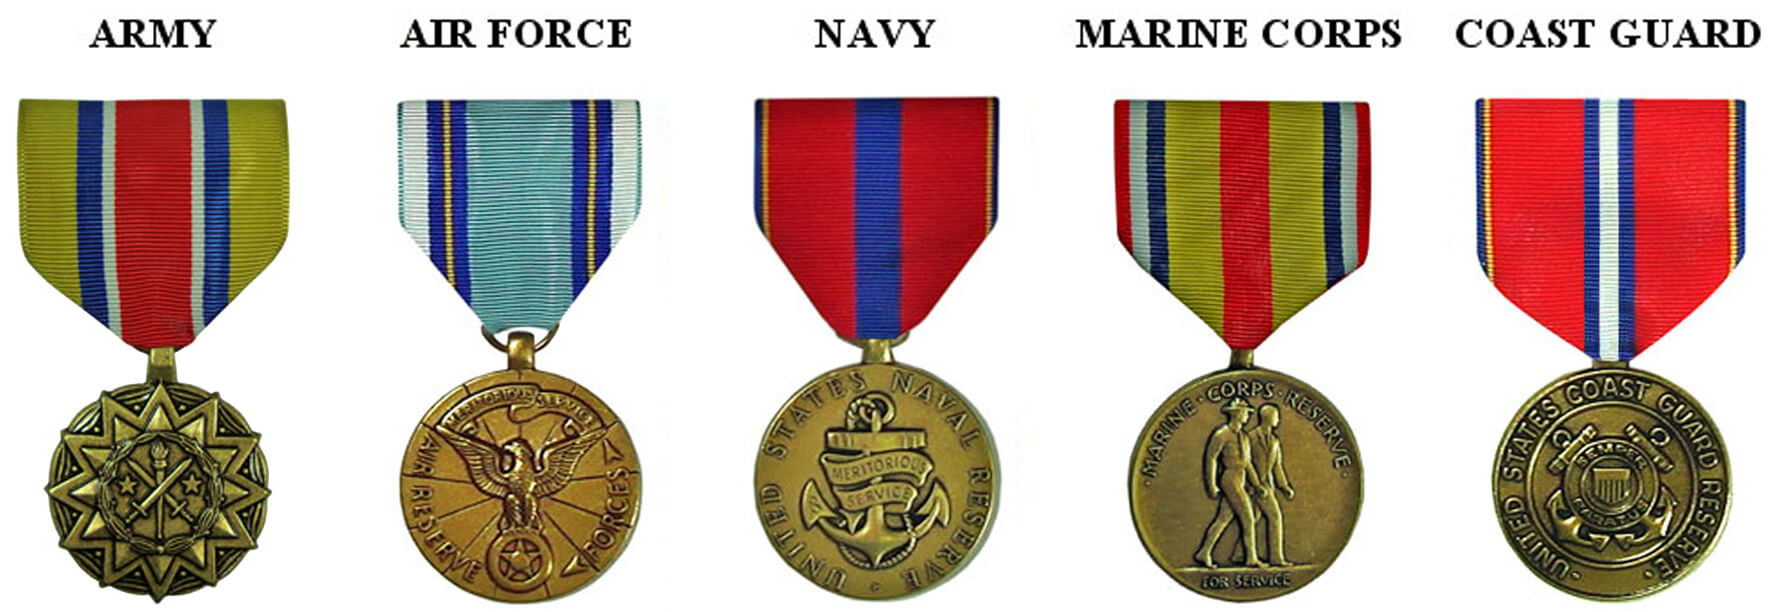 Reserve Good Conduct Medal – Wikipedia Throughout Army Good Conduct Medal Certificate Template